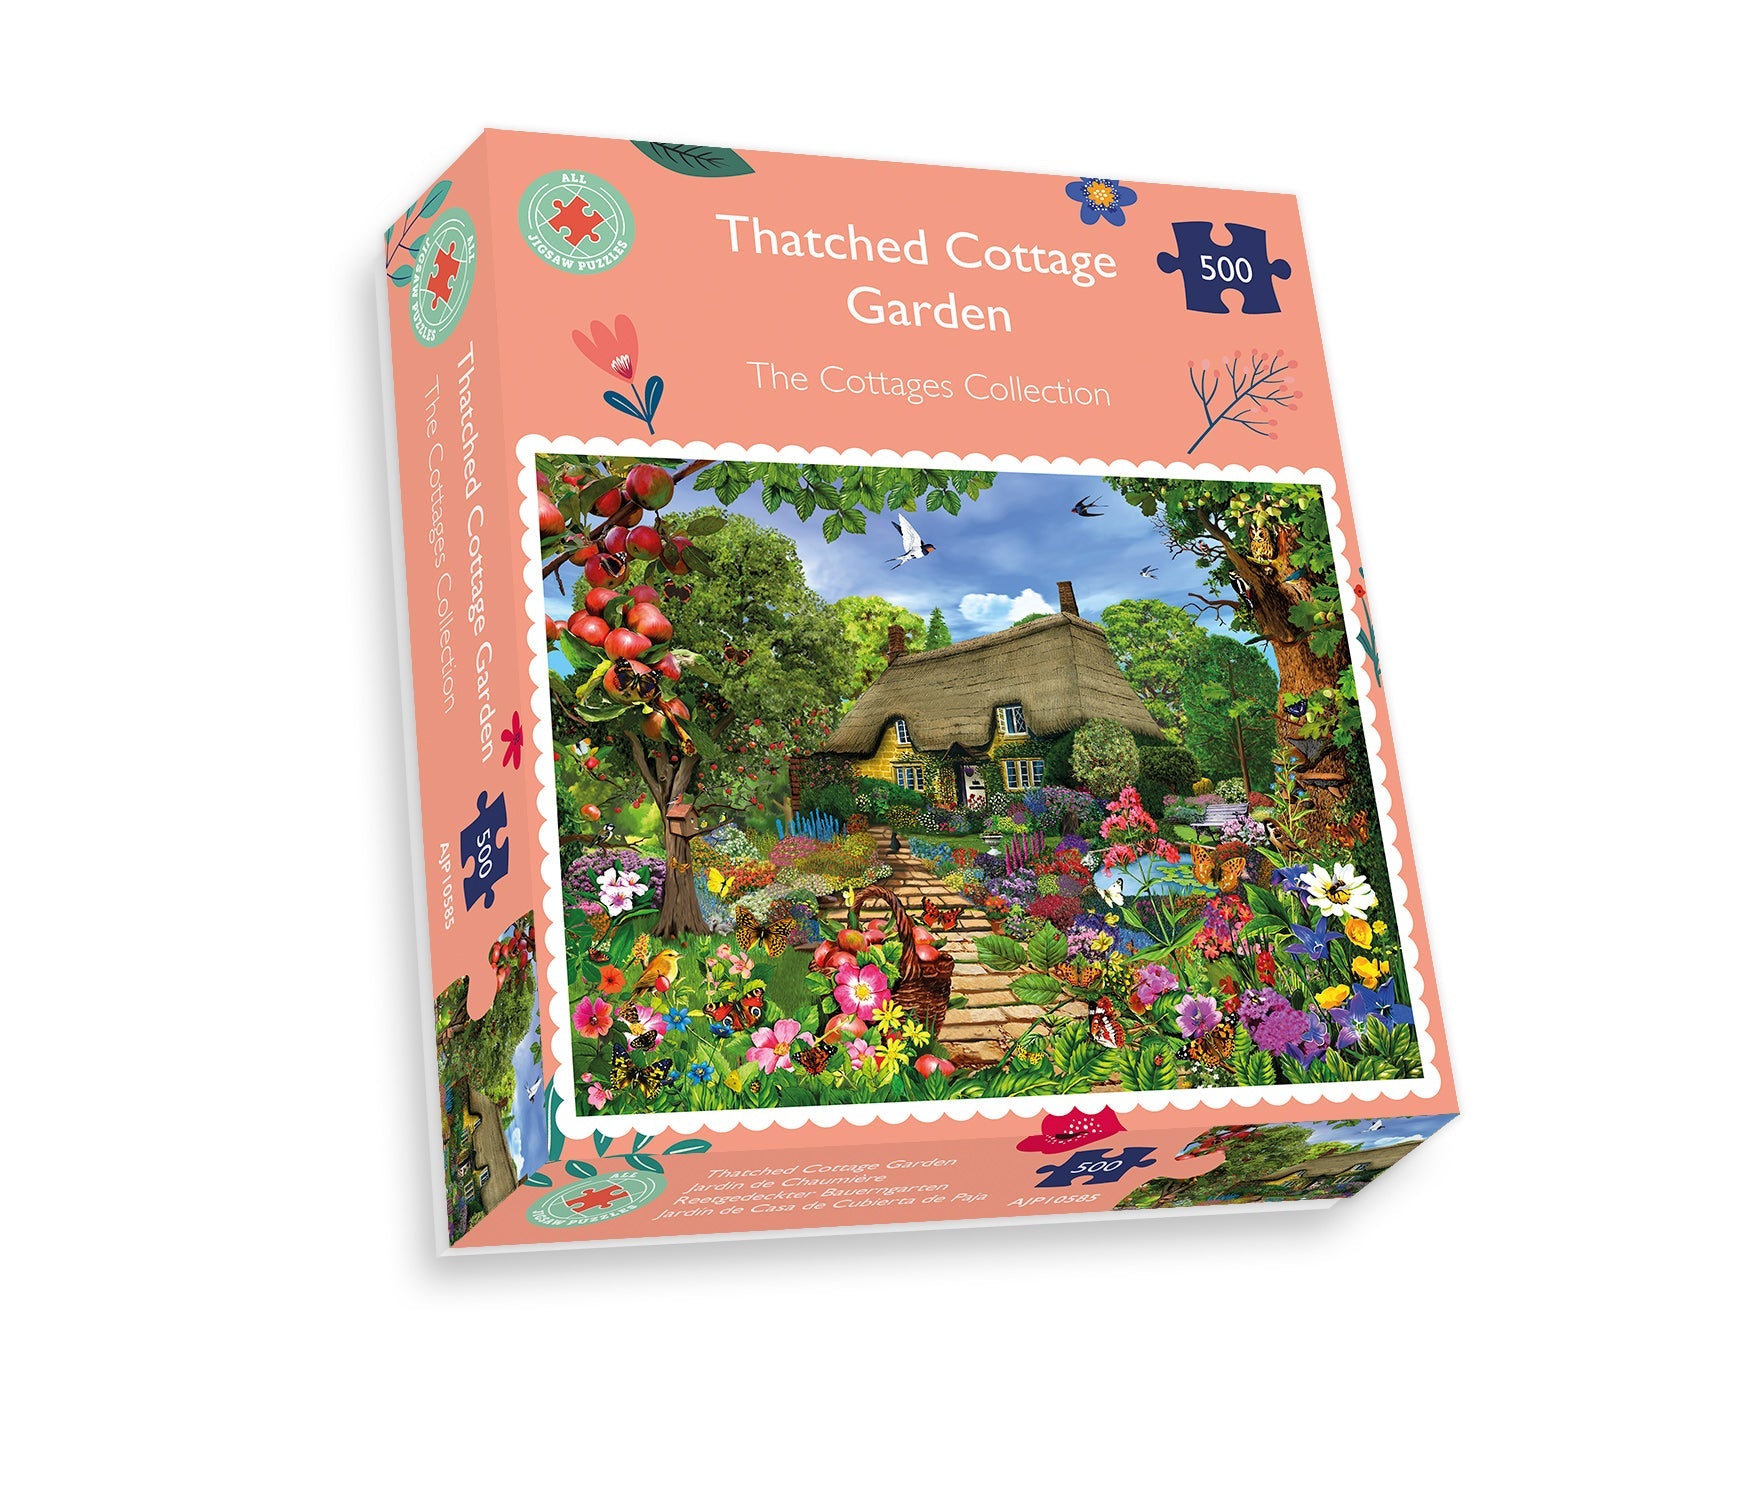 Thatched Cottage Garden 500 Piece Jigsaw Puzzles